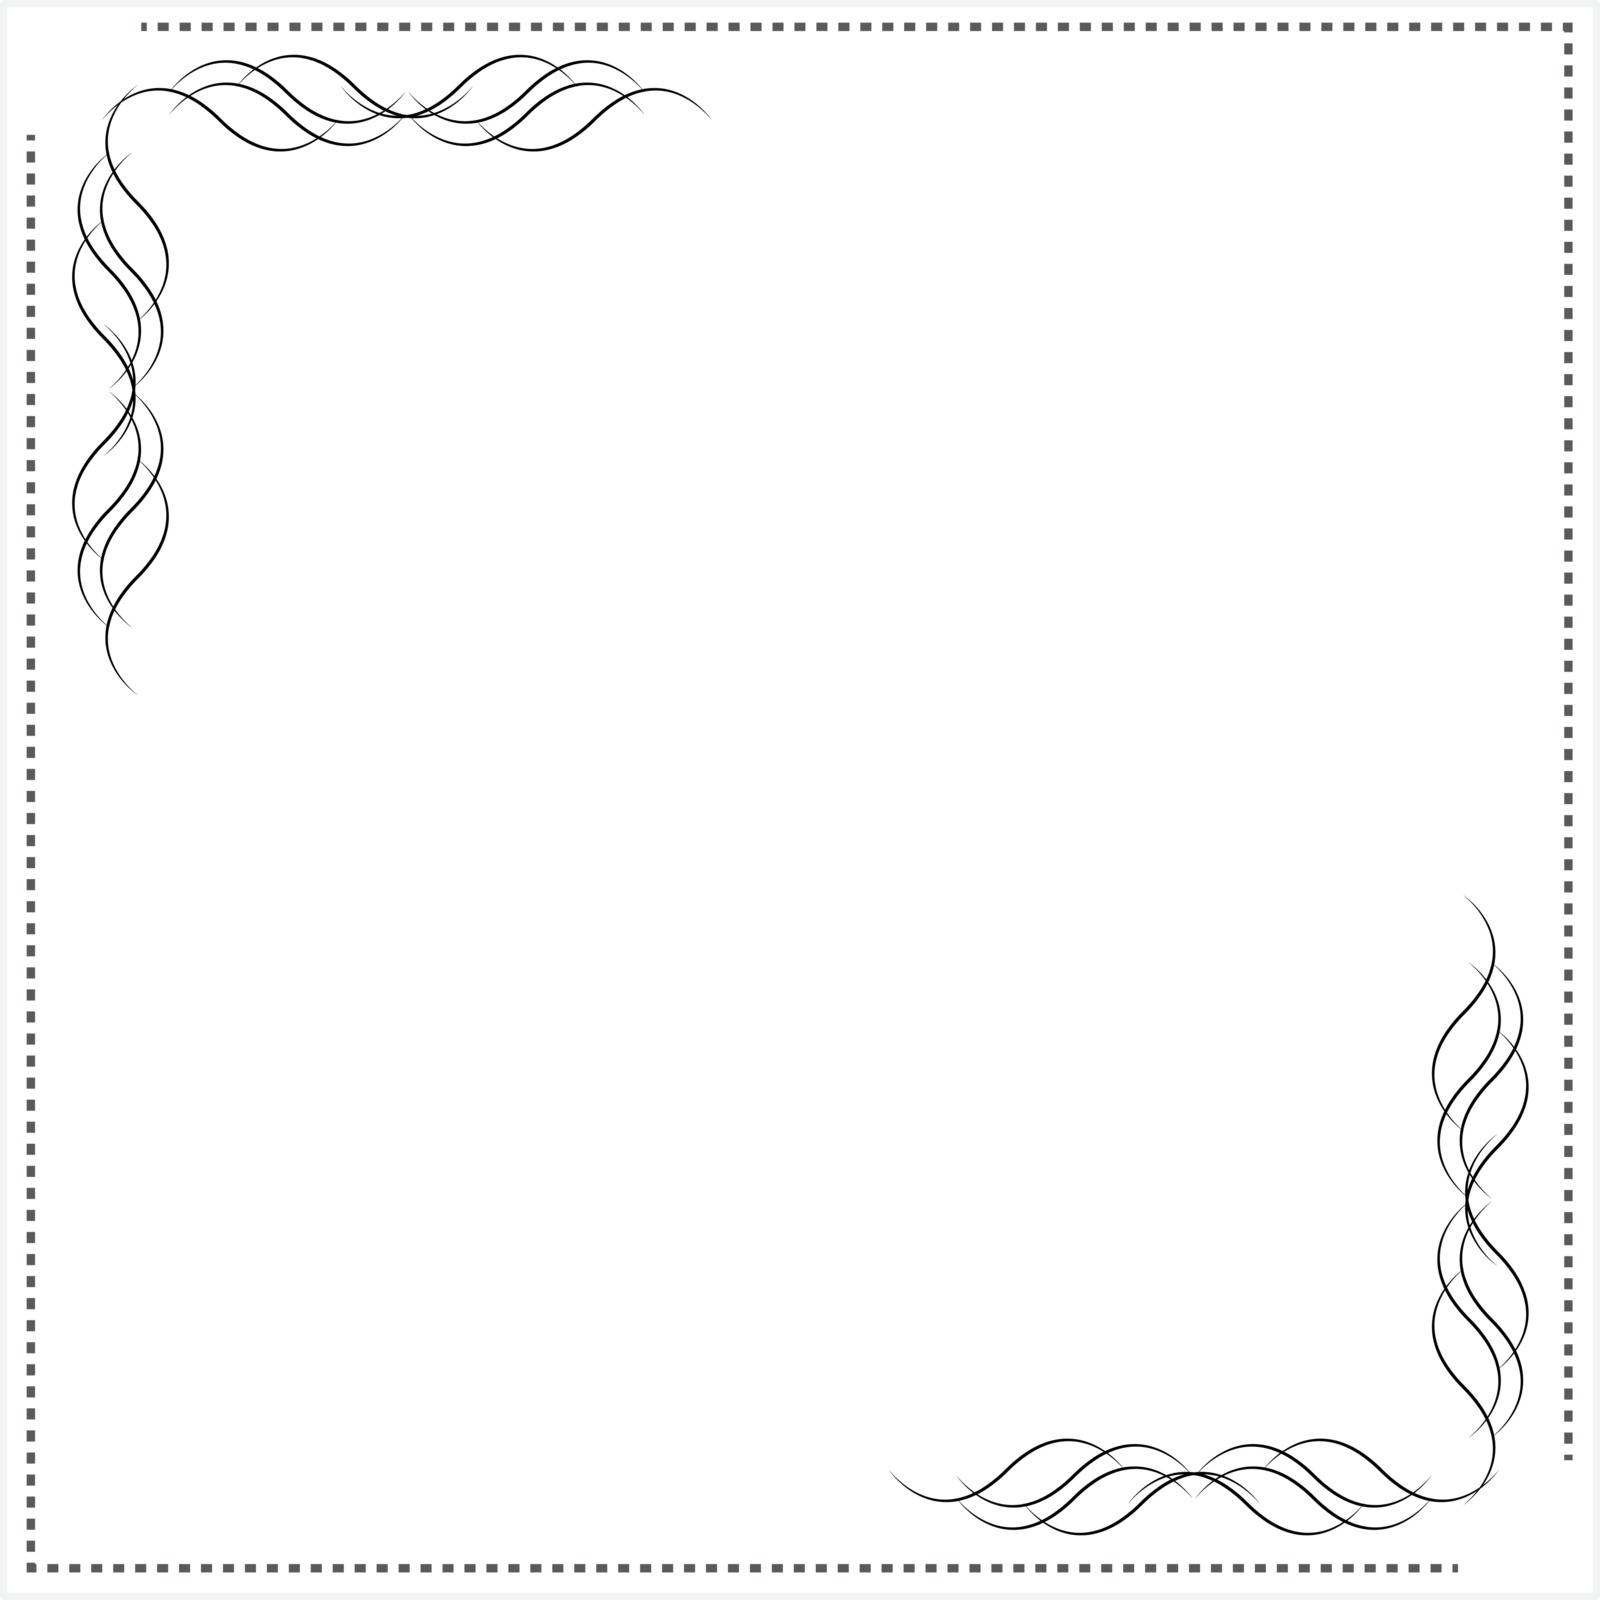 frame for design drawn in vector